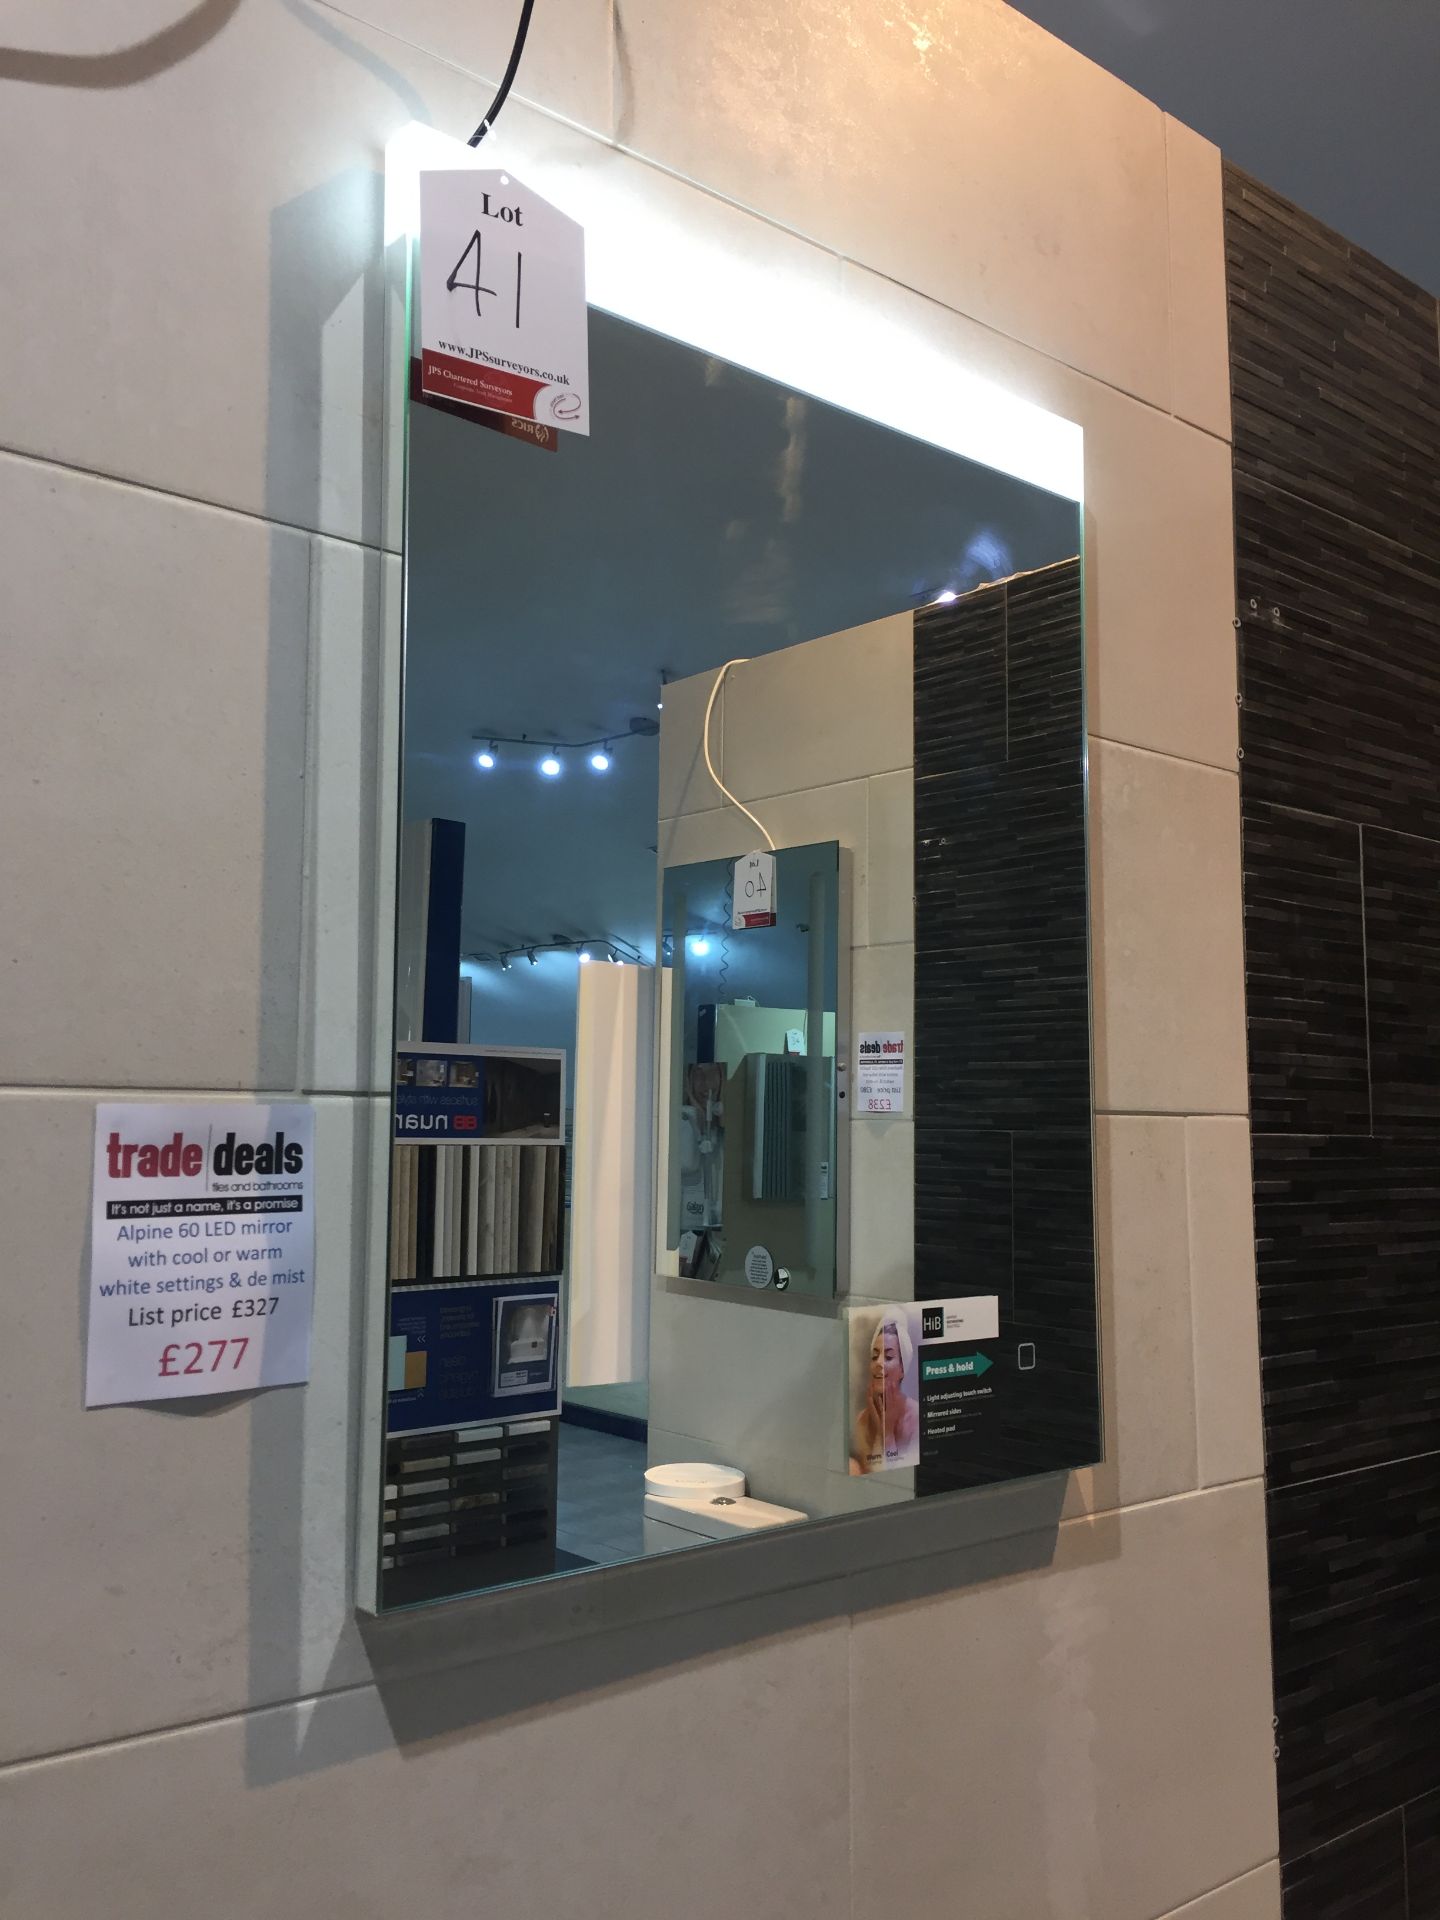 Alpine white 60 LED mirror w/ cool or warm settings & de-mist £327 reduced to £277